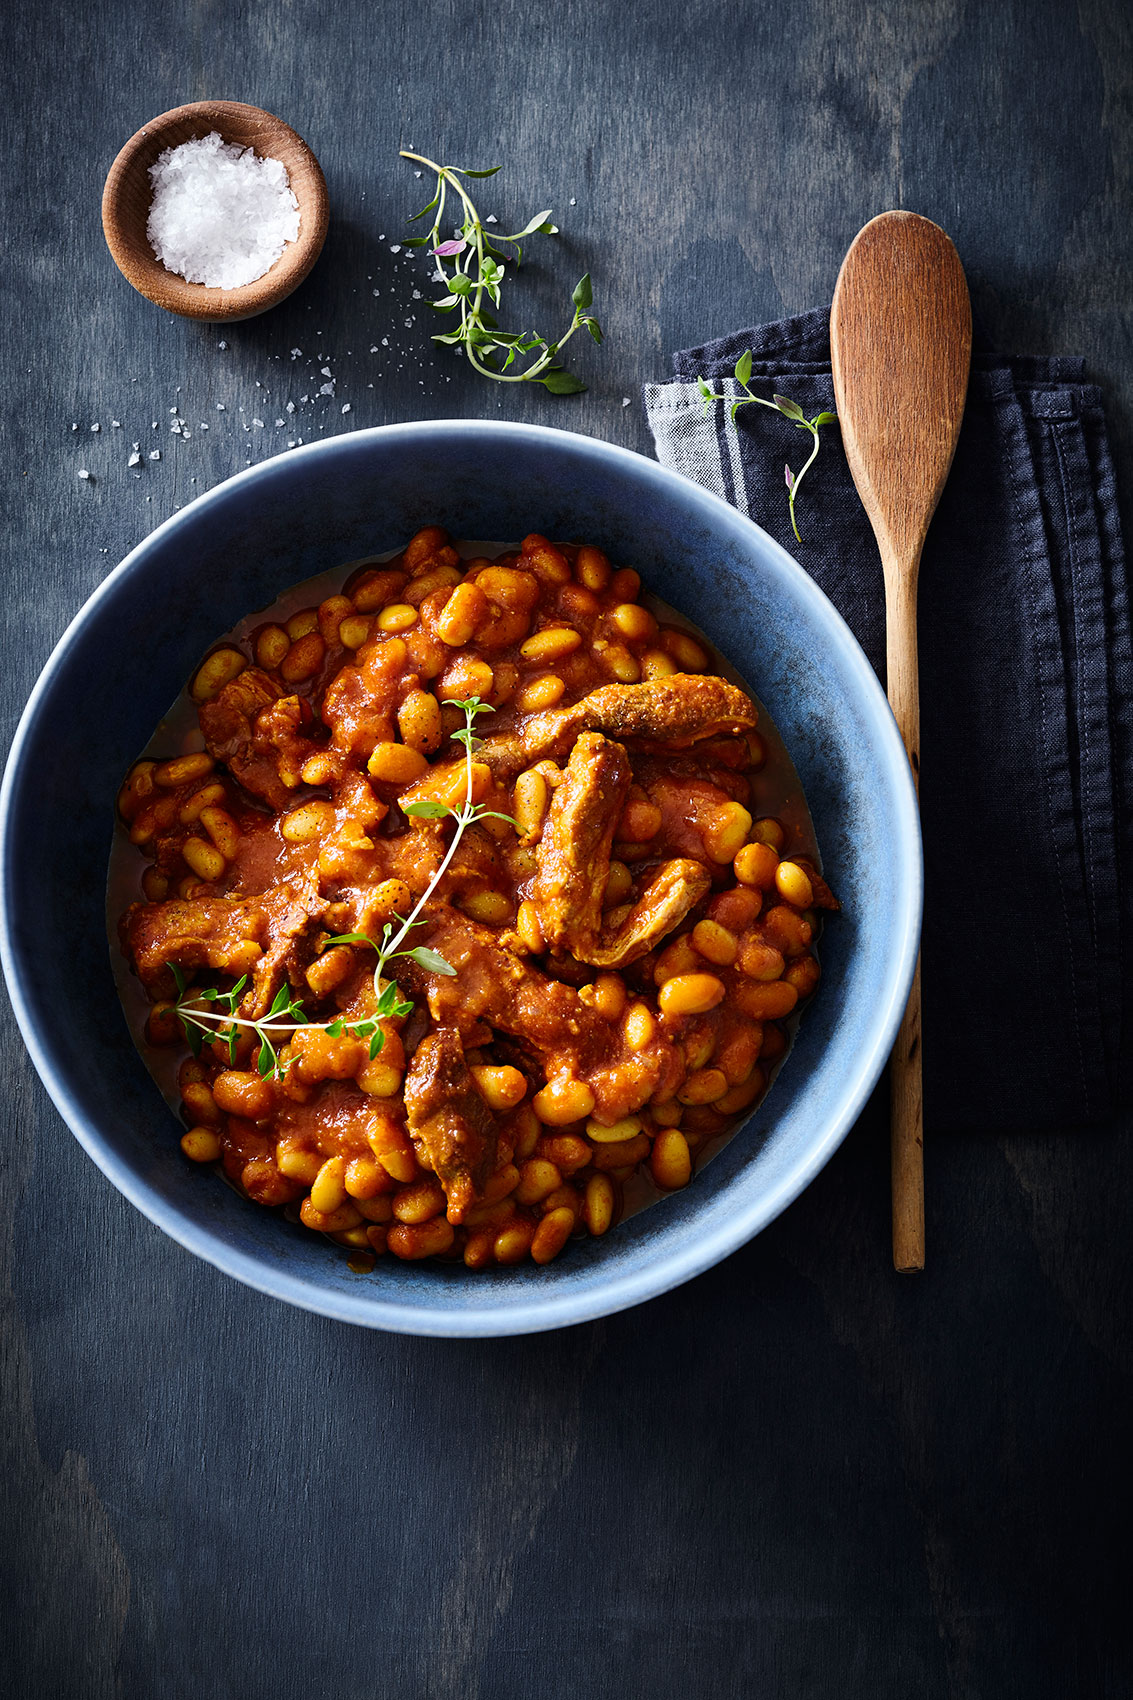 Slow Cooked • Boston Baked Beans with Thyme, Salt & Wooden Spoon • Cookbook & Editorial Food Photography